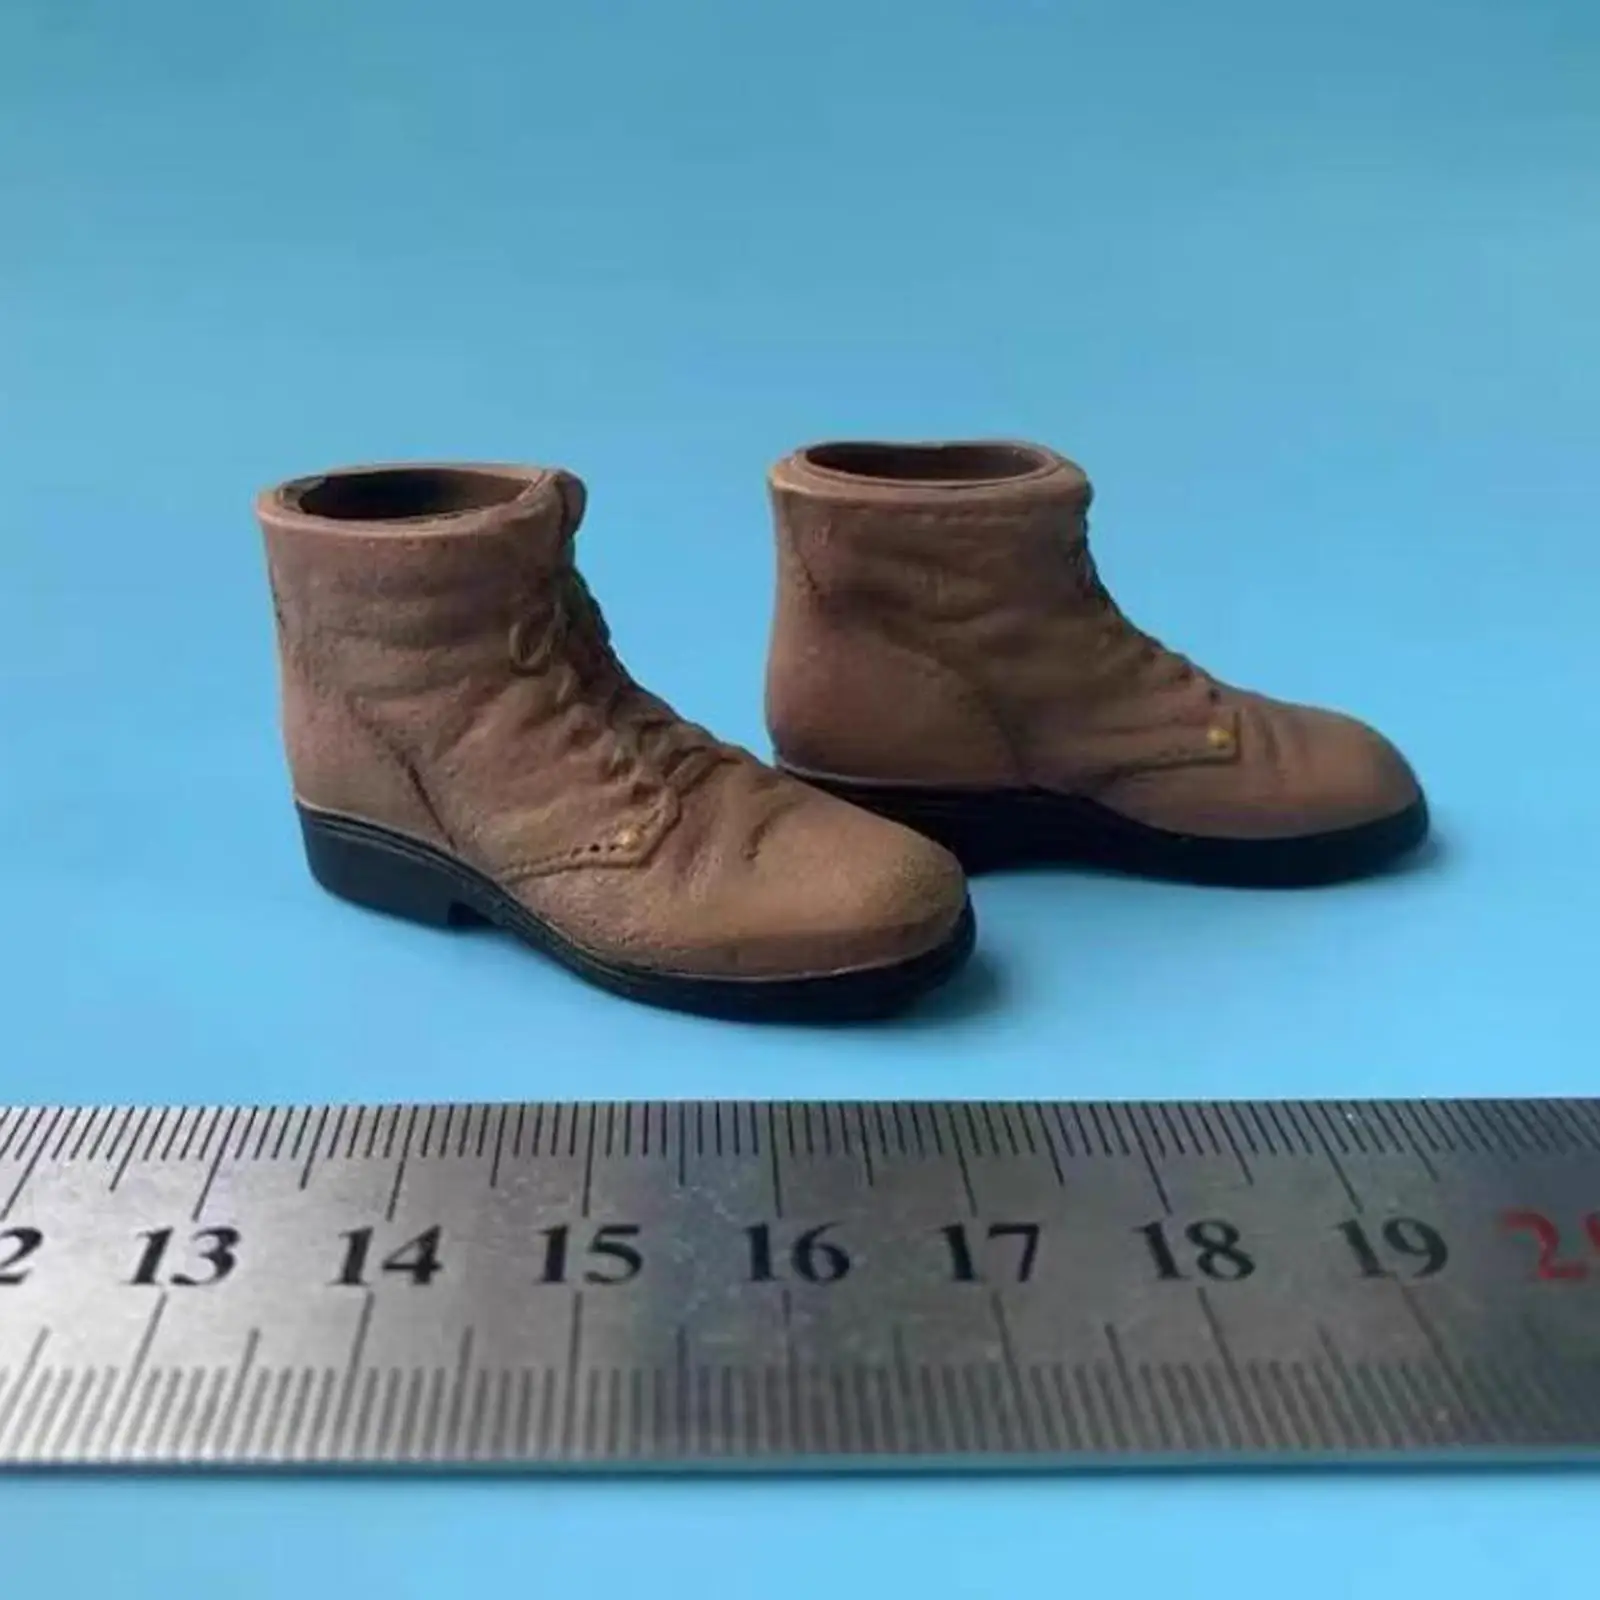 1/6 Scale Action Figure US Soldier Shoes Kids Toy Adults Gifts Fashion 12 inch Male Doll Shoes for 12